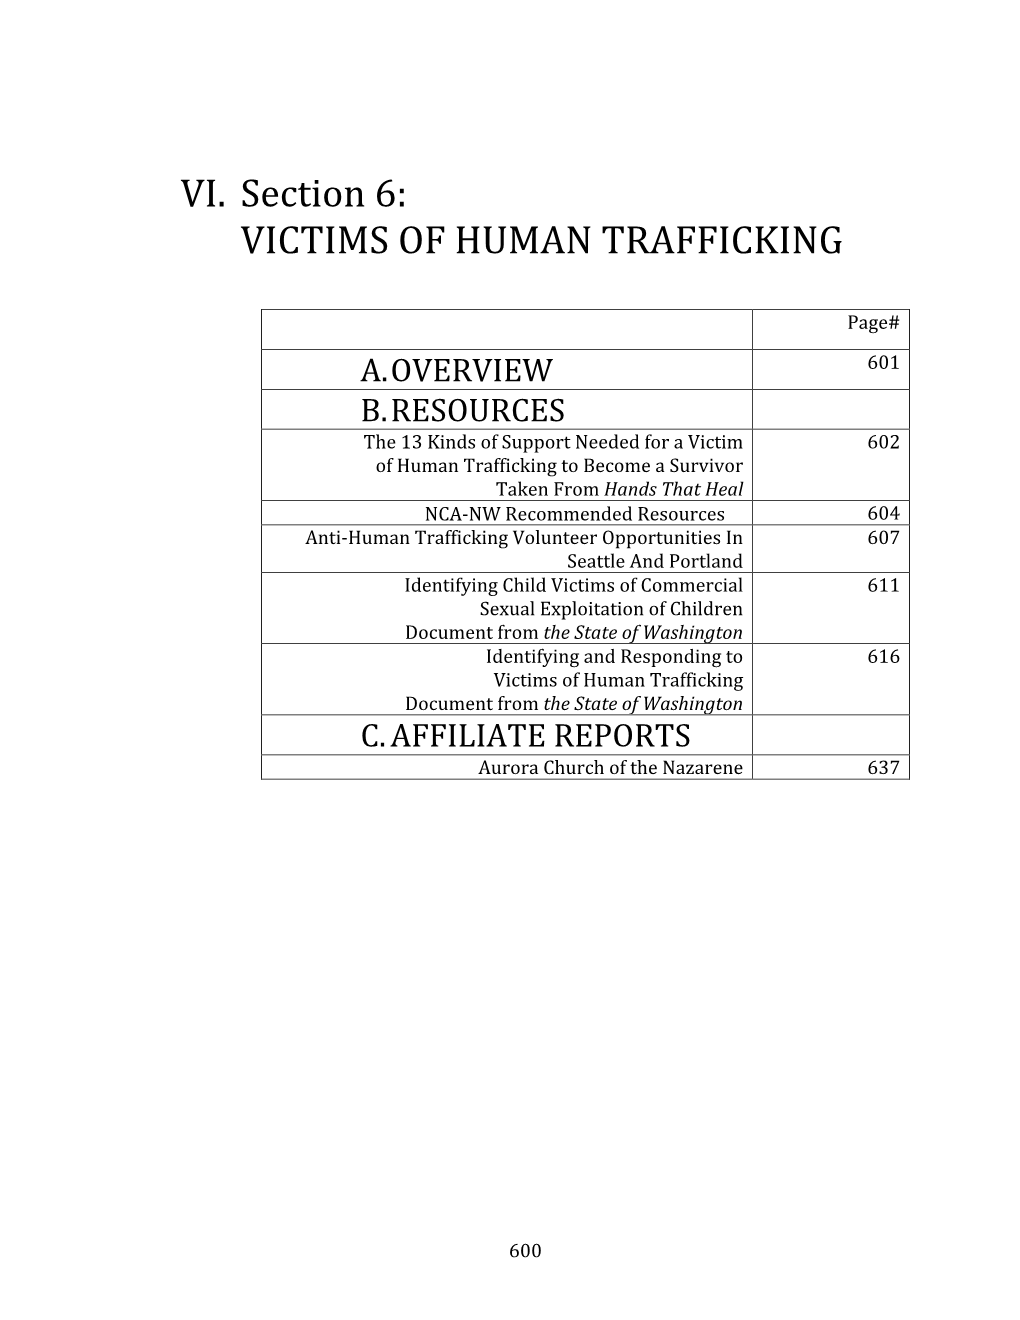 Victims of Human Trafficking